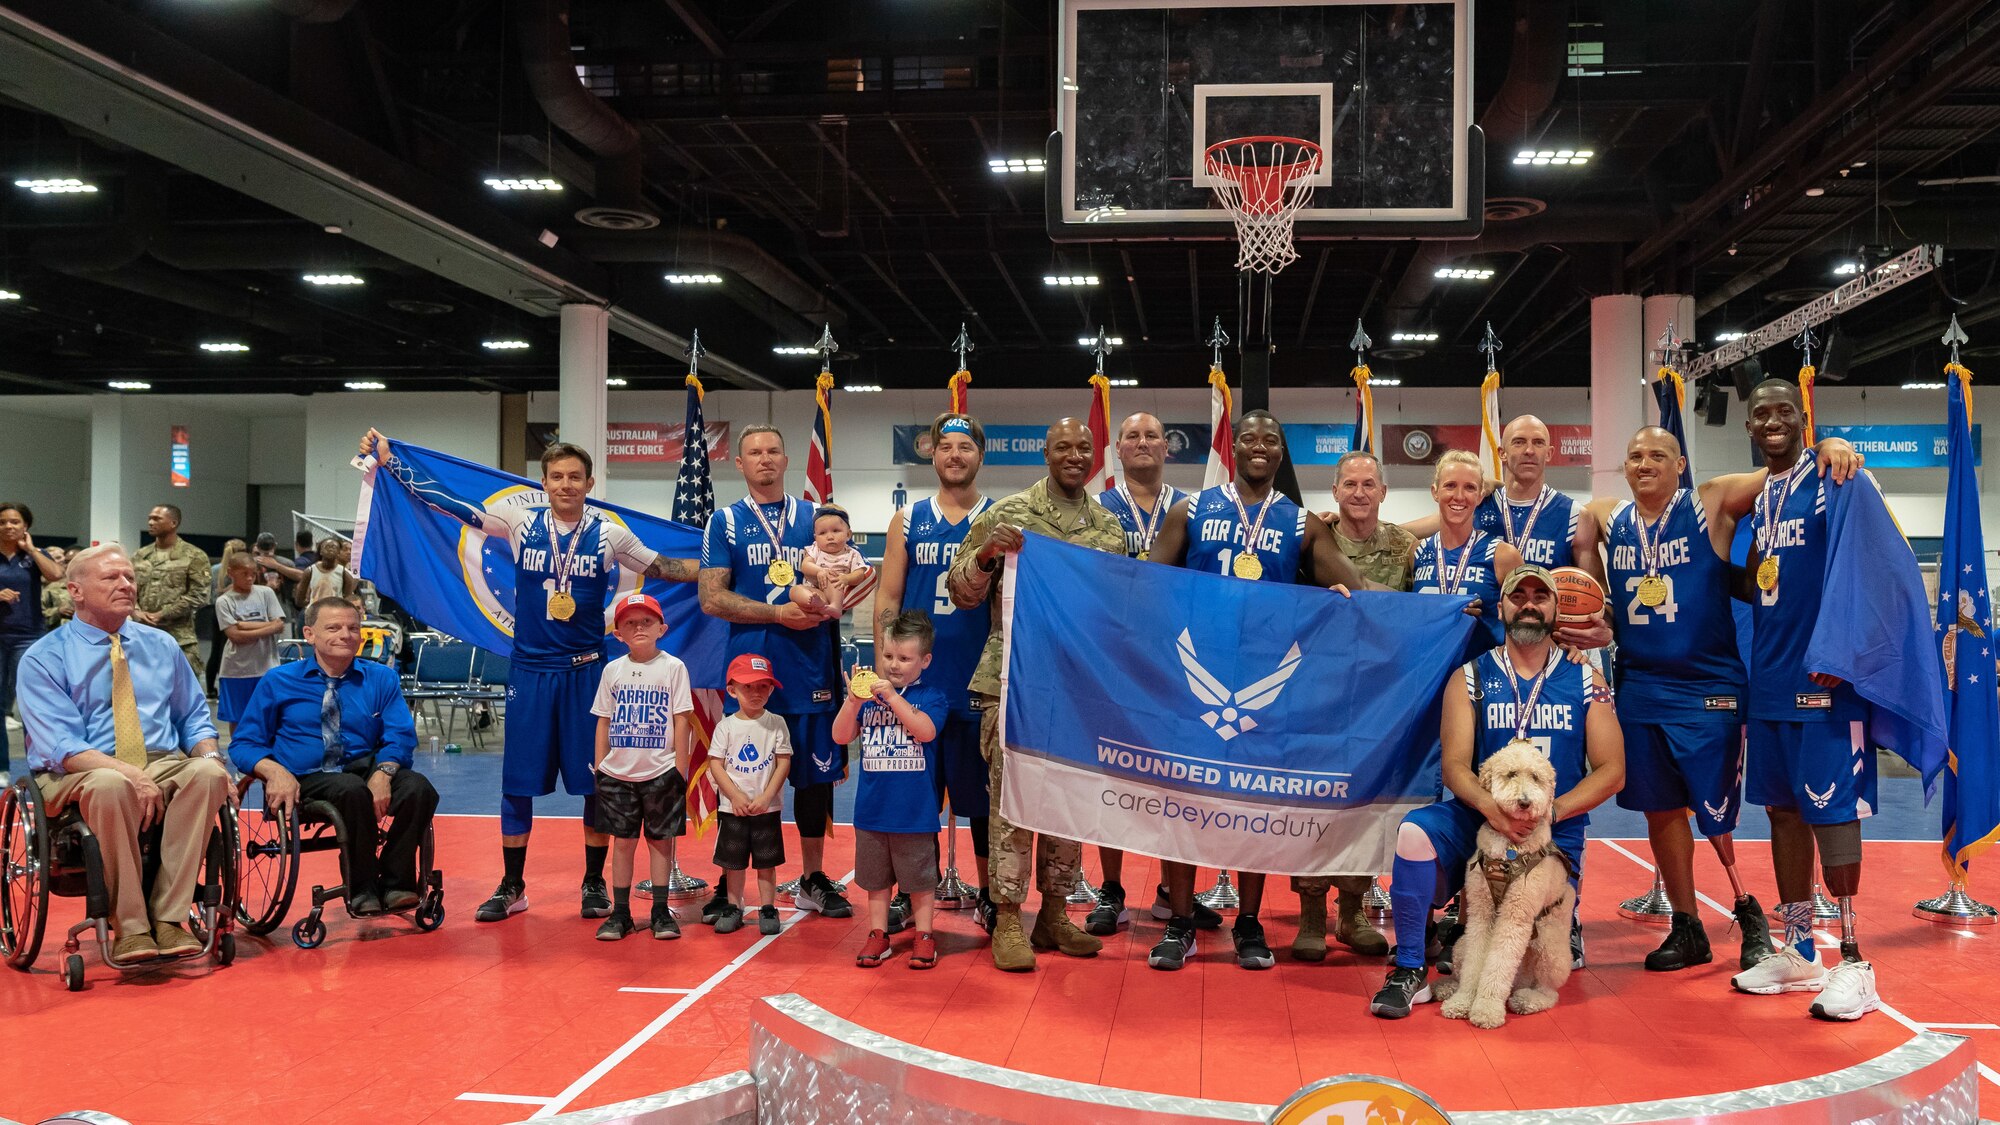 Air Force Chief of Staff Gen. David L. Goldfein and Chief Master Sgt. of the Air Force Kaleth O. Wright pose with the gold medal winner of wheelchair basketball at the 2019 Department of Defense Warrior Games at Tampa, Fla, June 28, 2019. Approximately 300 athletes participated in 13 adaptive sports competitions on June 21-30. (U.S. Air Force photo by Tech Sgt. Lionel Castellano)